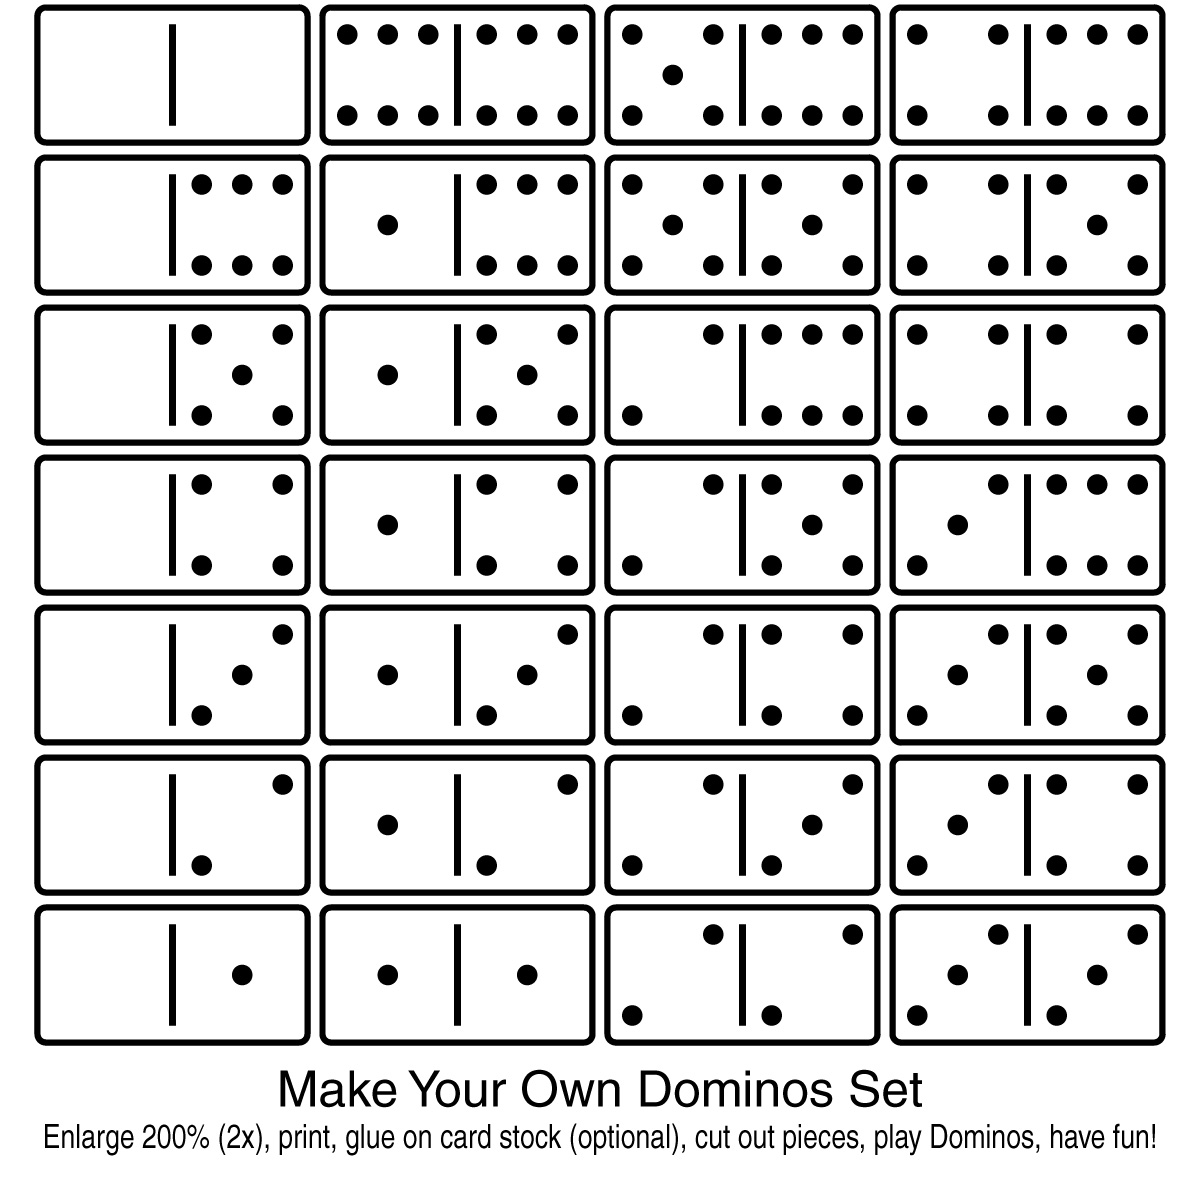 6 Best Images of Phonics Printable Domino Game Pieces Make Your Own